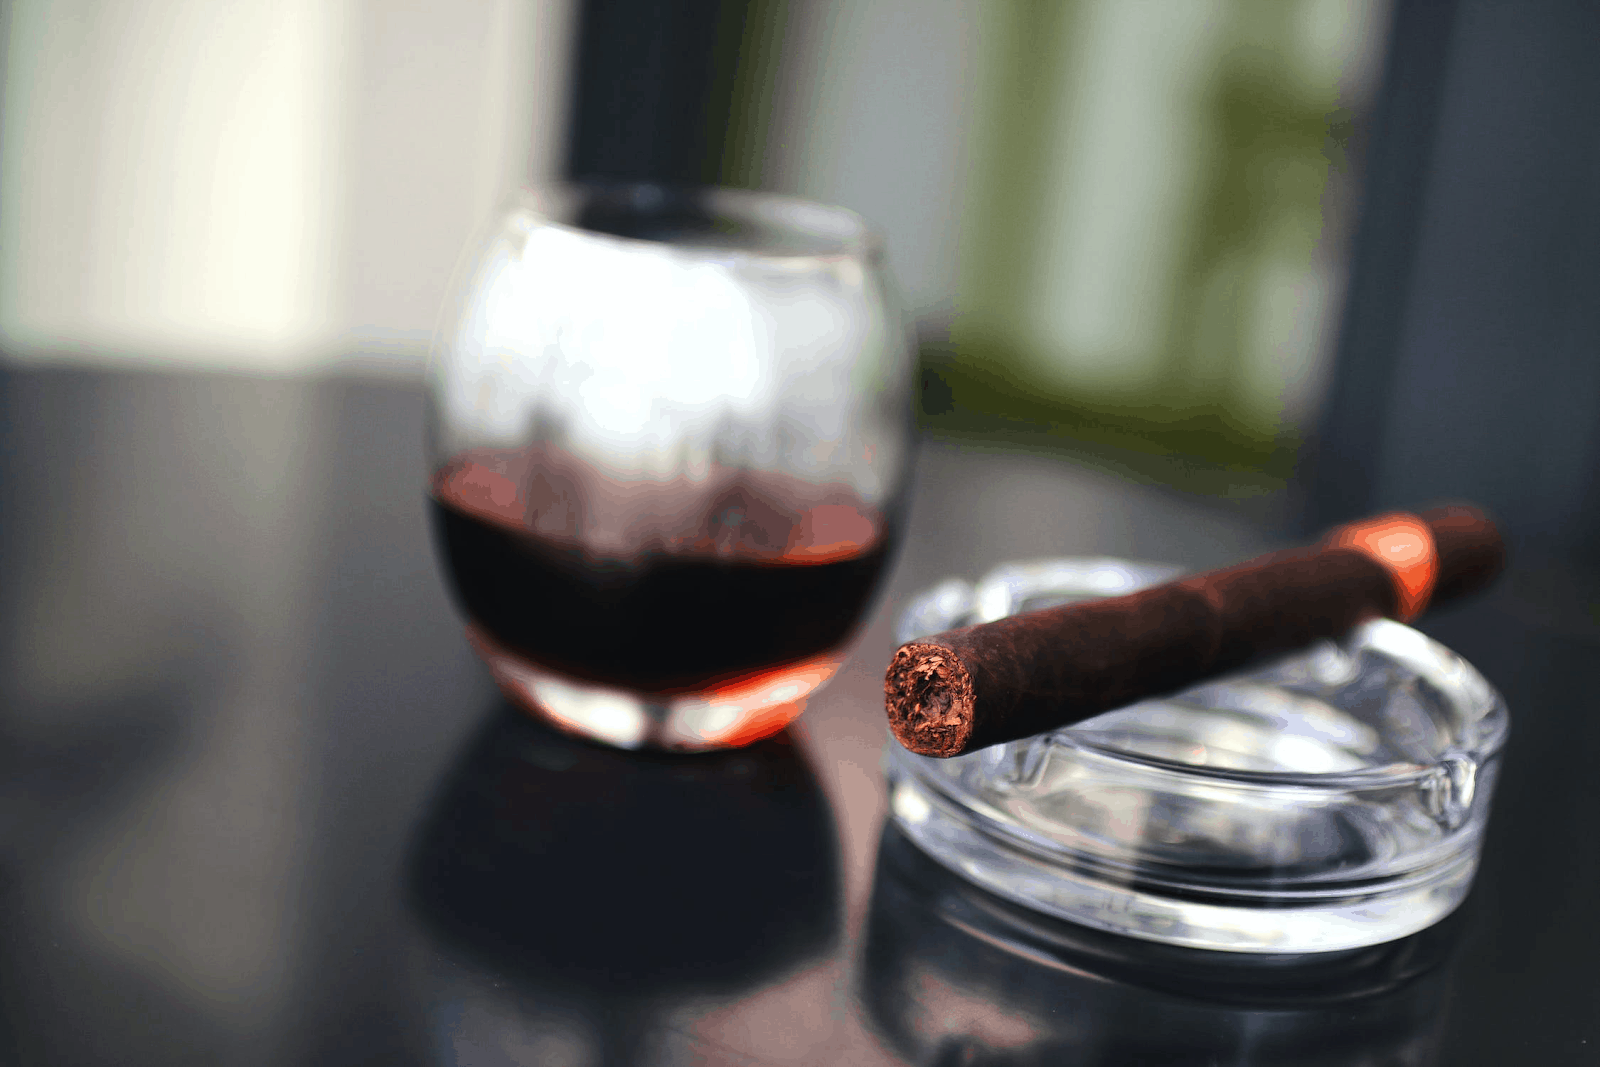 How To Smoke Backwoods Blunt: Tips And Tricks From The Pros